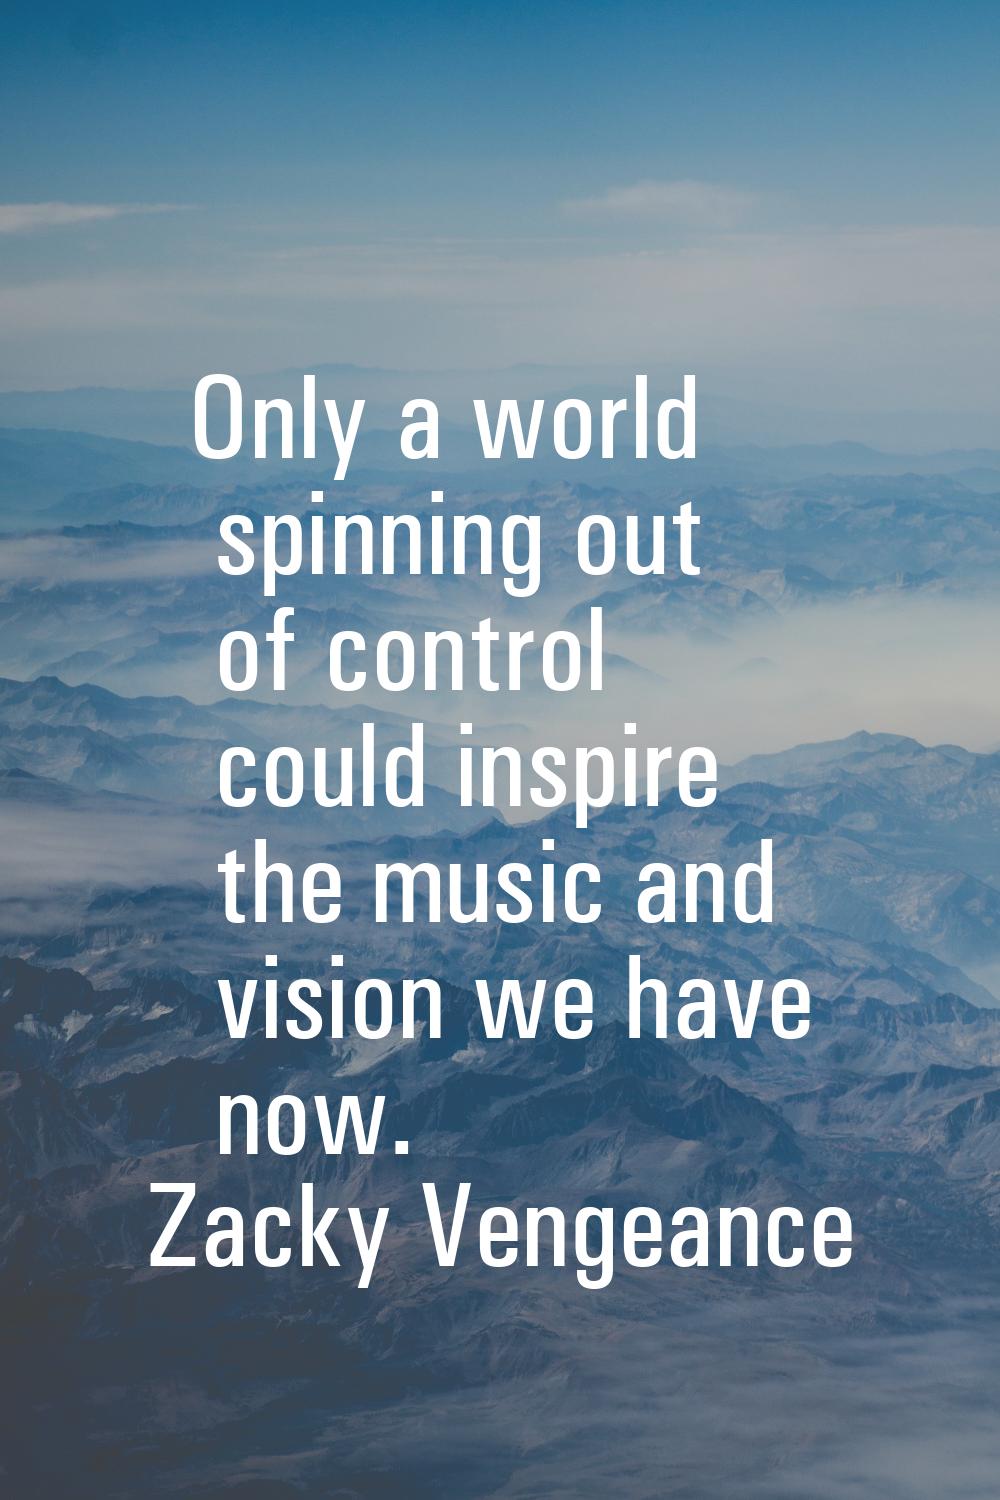 Only a world spinning out of control could inspire the music and vision we have now.